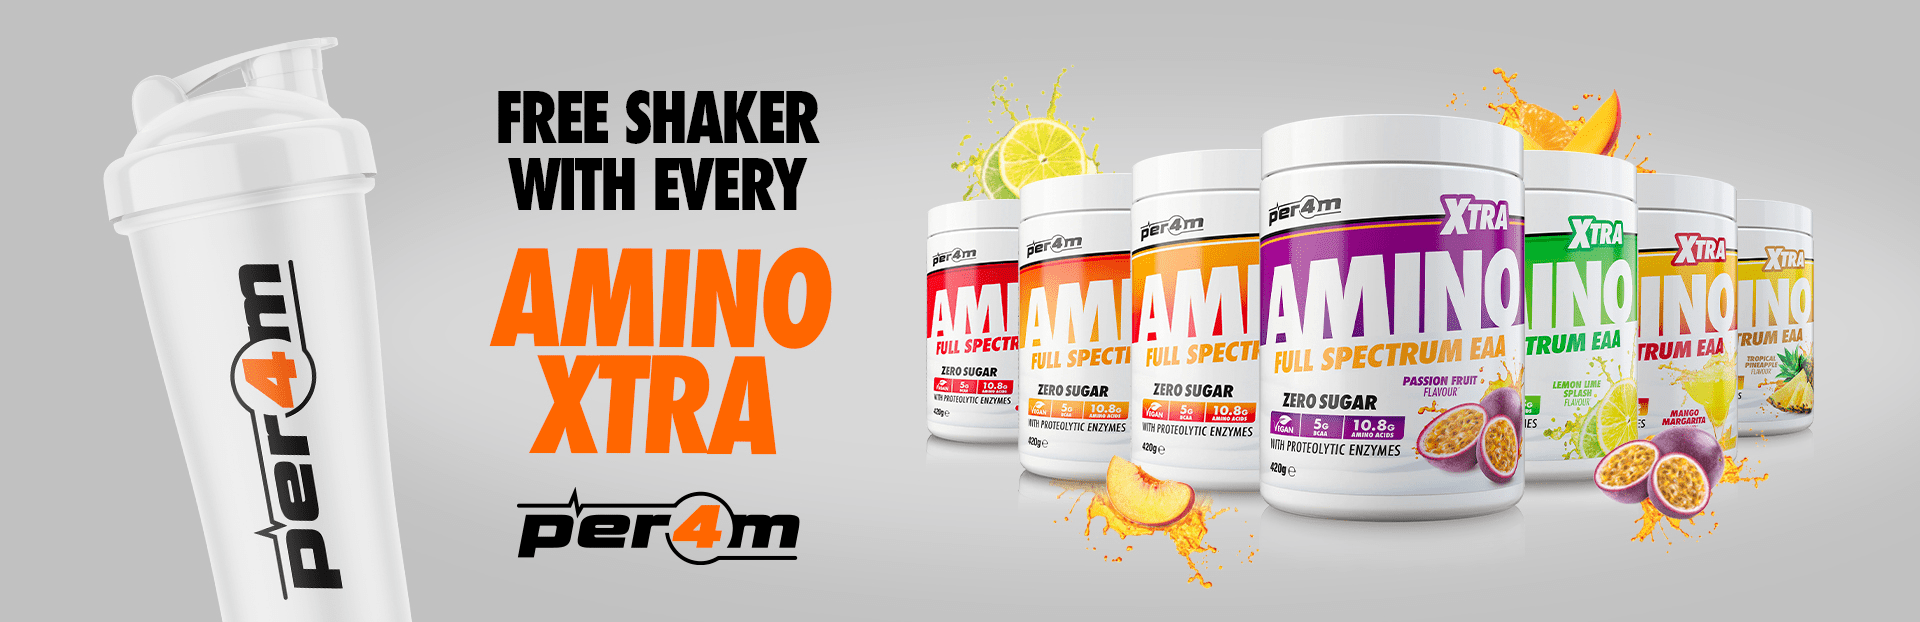 Promotional banner for Per4m Amino with a free shaker offer displayed.